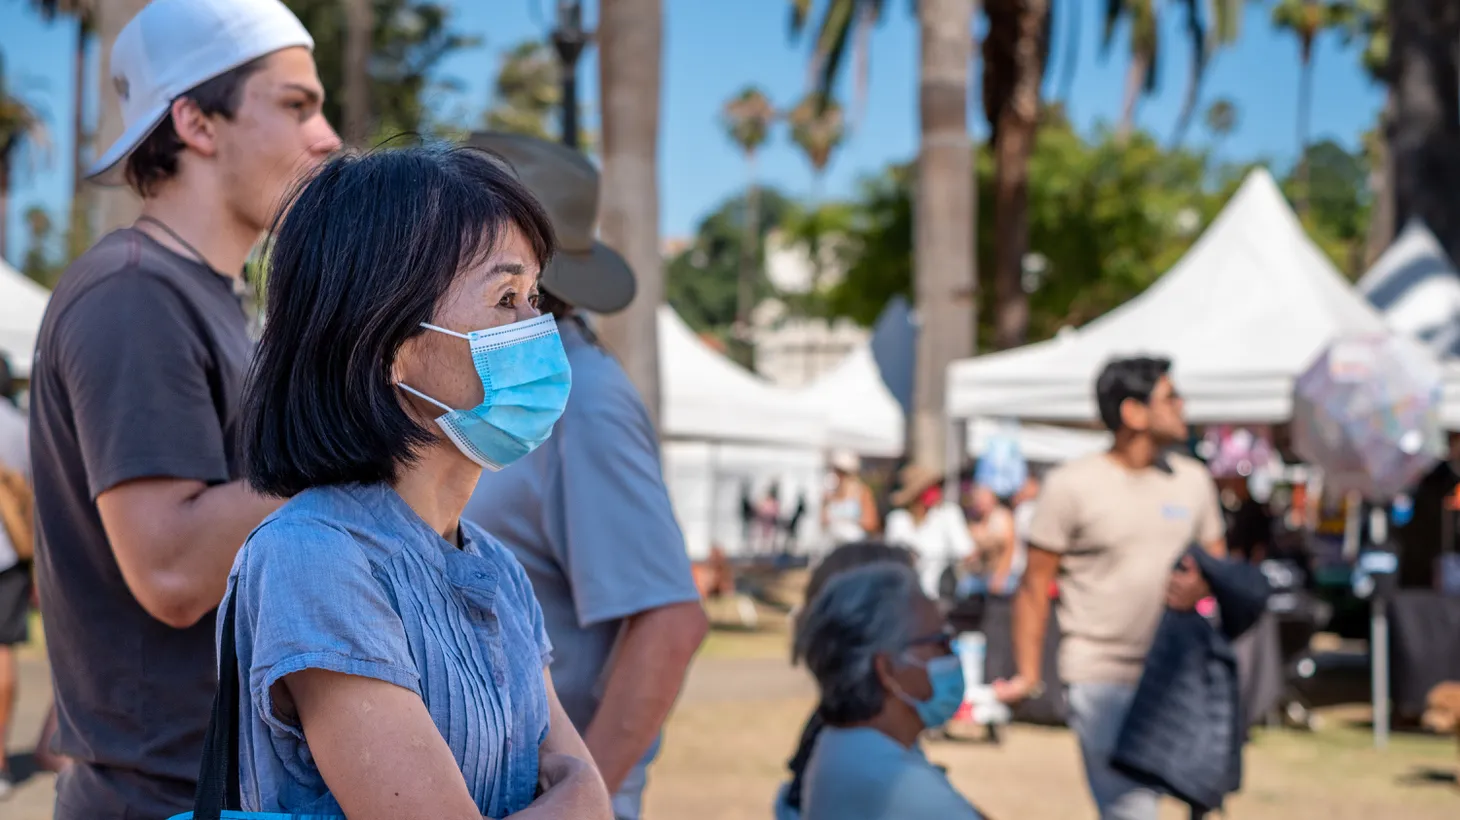 A woman wears a surgical mask while attending a festival at Echo Park Lake, July 10, 2022. As BA.5 rapidly spreads through LA, USC Professor Paula Cannon recommends that Angelenos keep masking up.